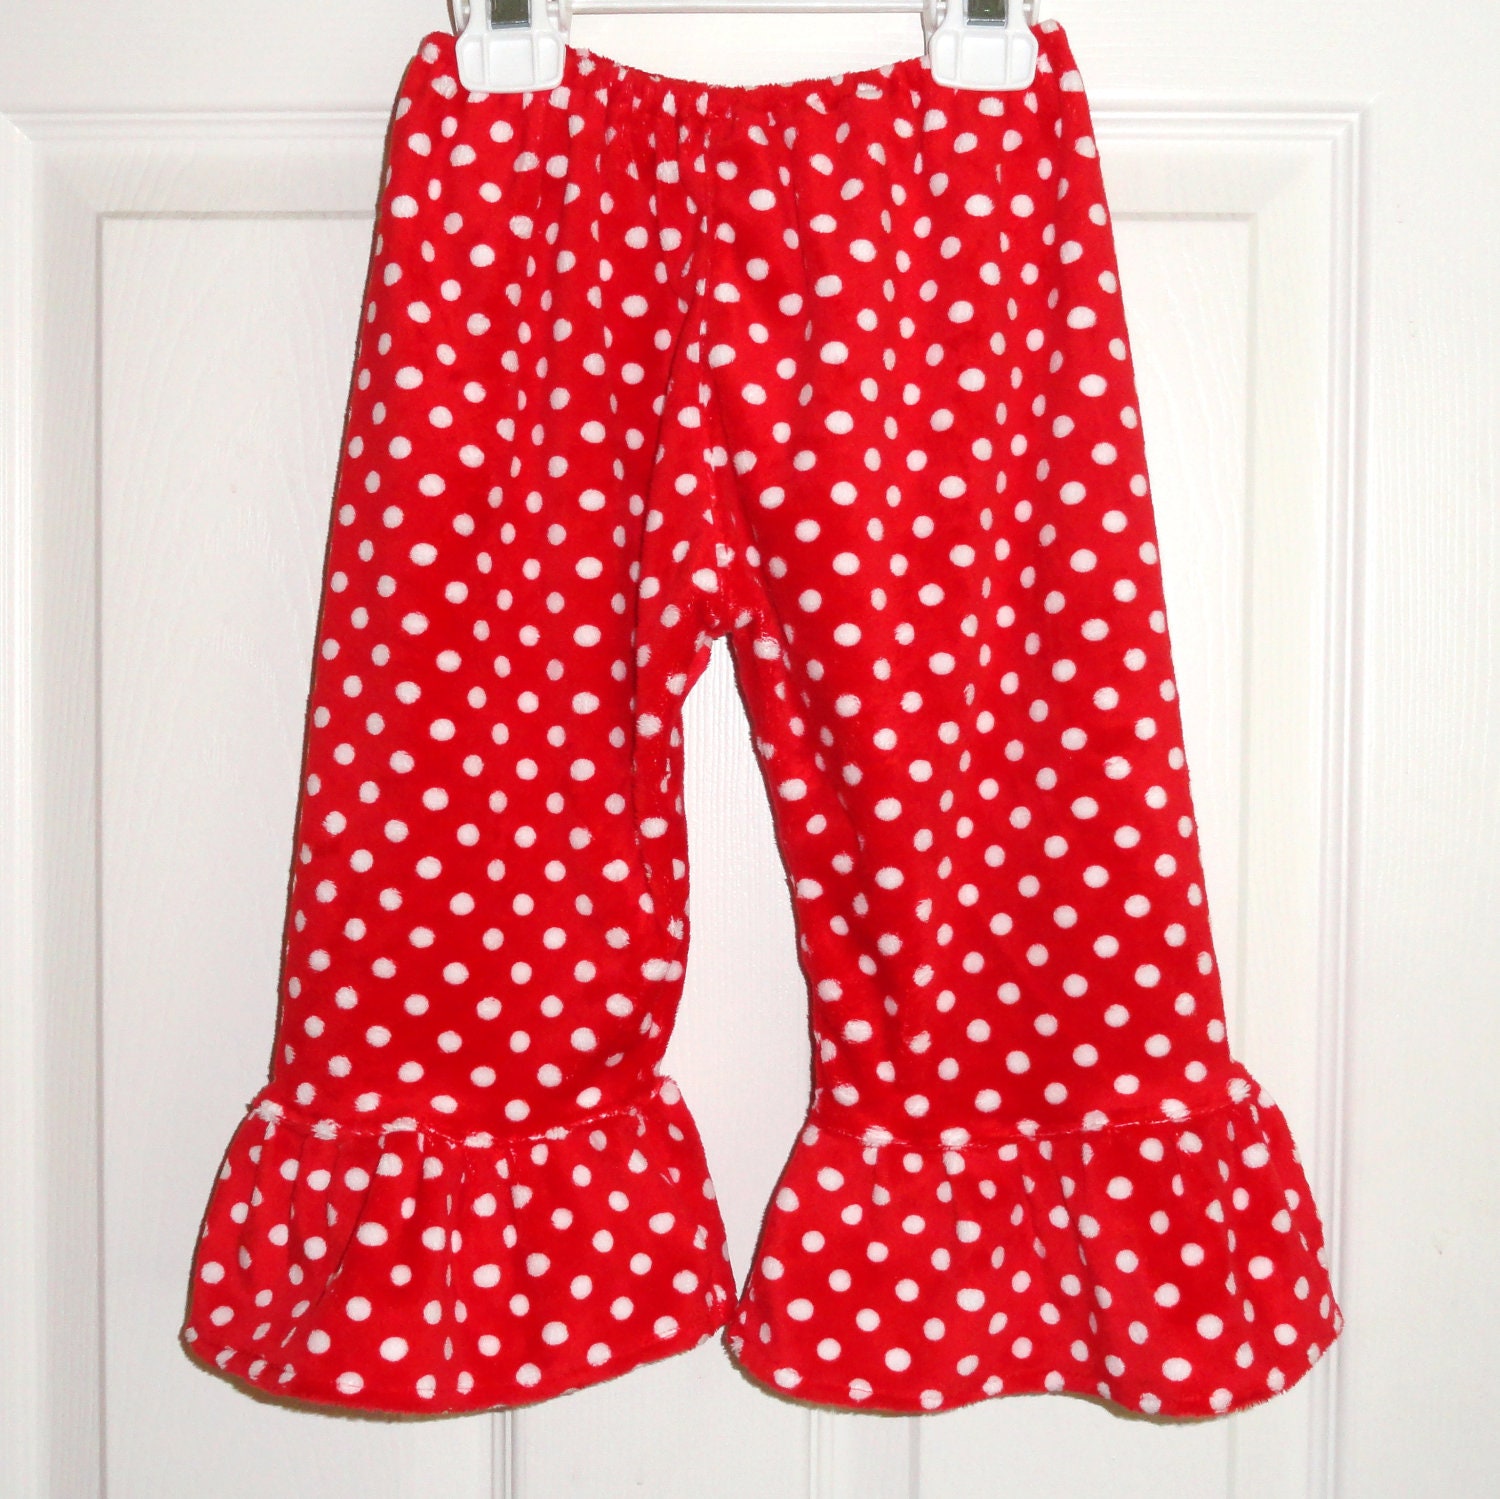 Girls Red Minky Polka Dot Ruffle Pants sizes 12m 2t 3t 4t 5t 6 7 8 10 - Amievoltaire